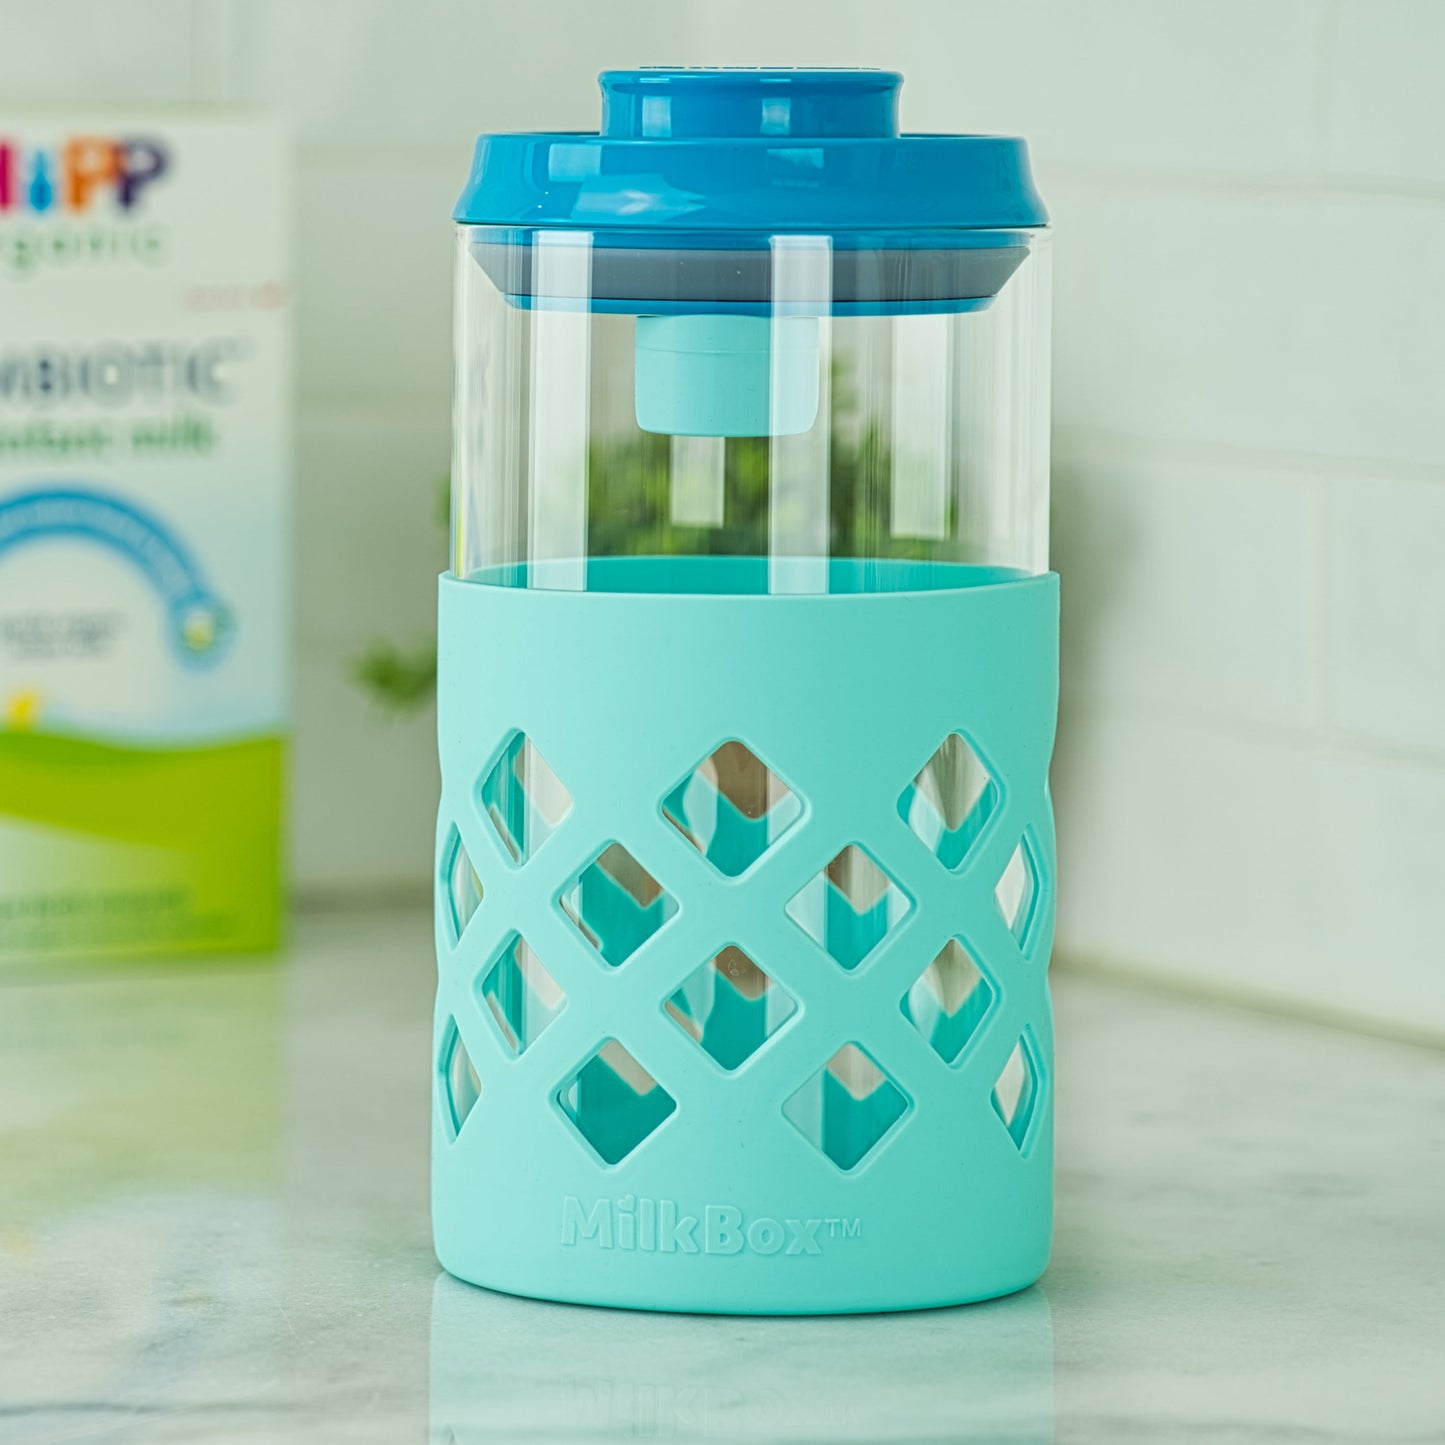 MilkBox Plus Glass Body Airtight Storage Container For Baby Formula & Food BPA-Free - 1.4 L Capacity